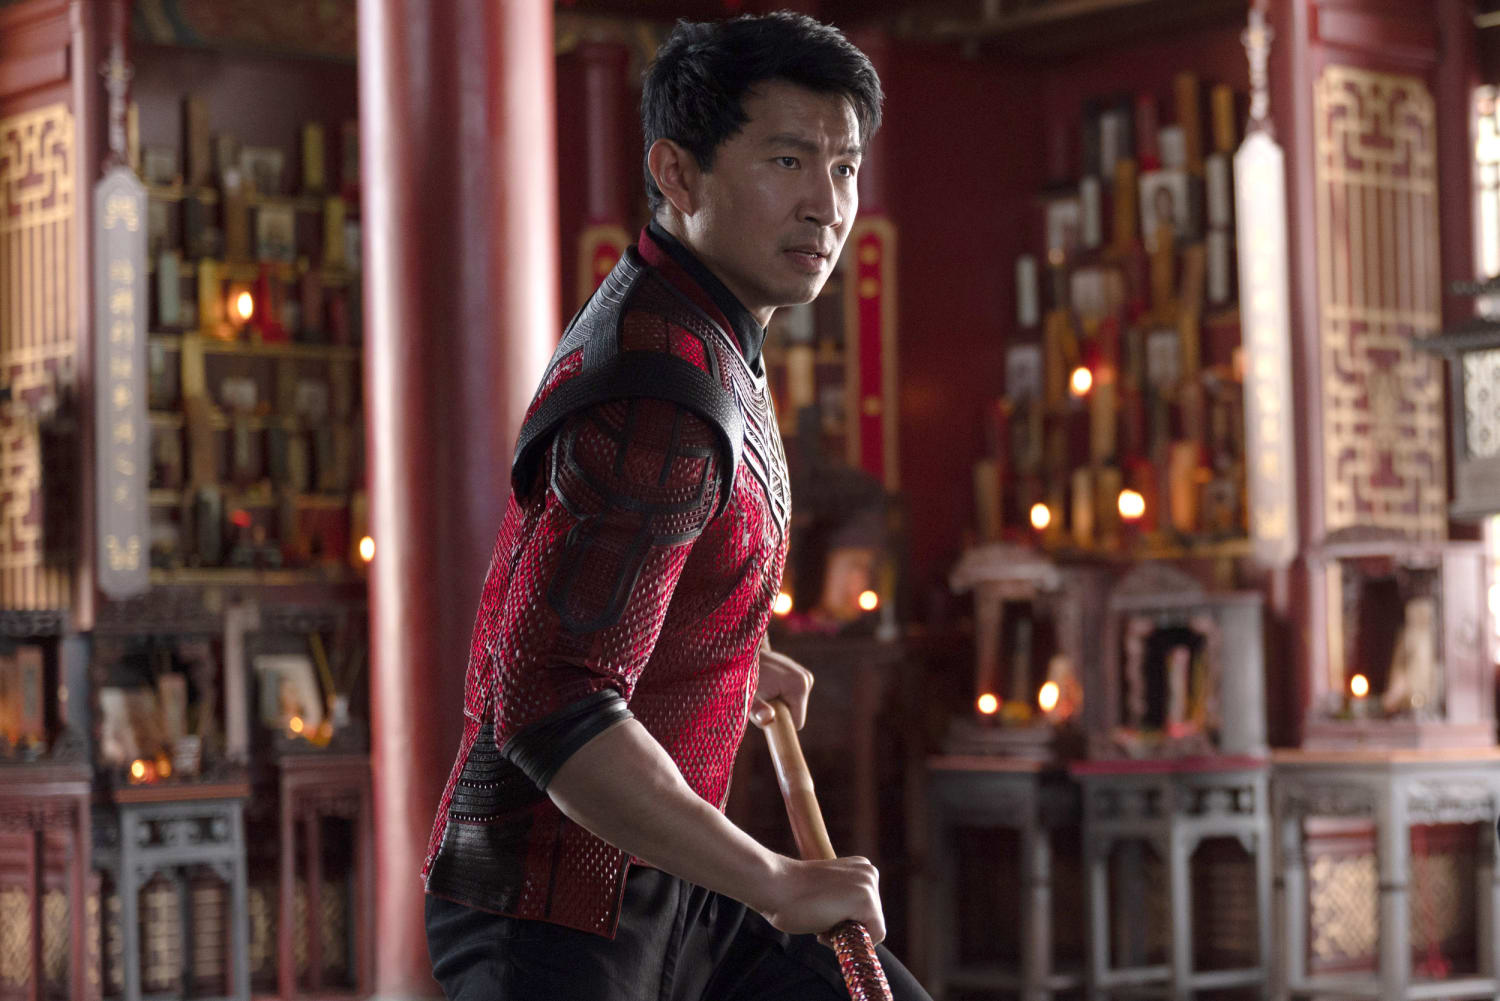 A ‘Shang-Chi’ sequel is officially in the works